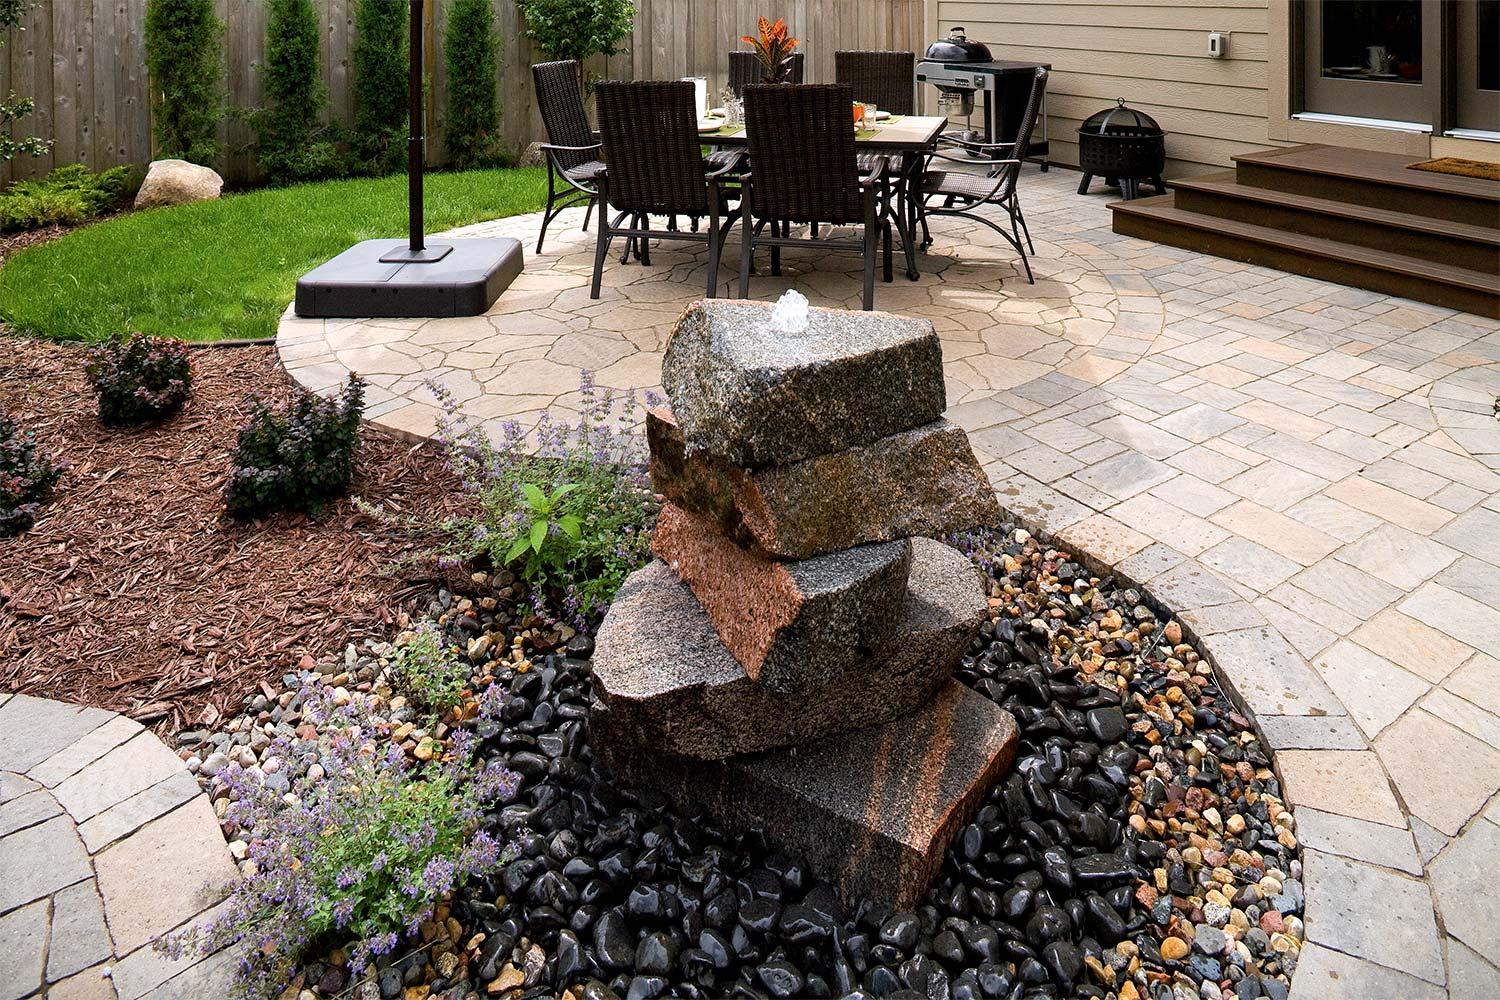 Stacked stone ornamental water fountain with dining patio and dog grass in the background.